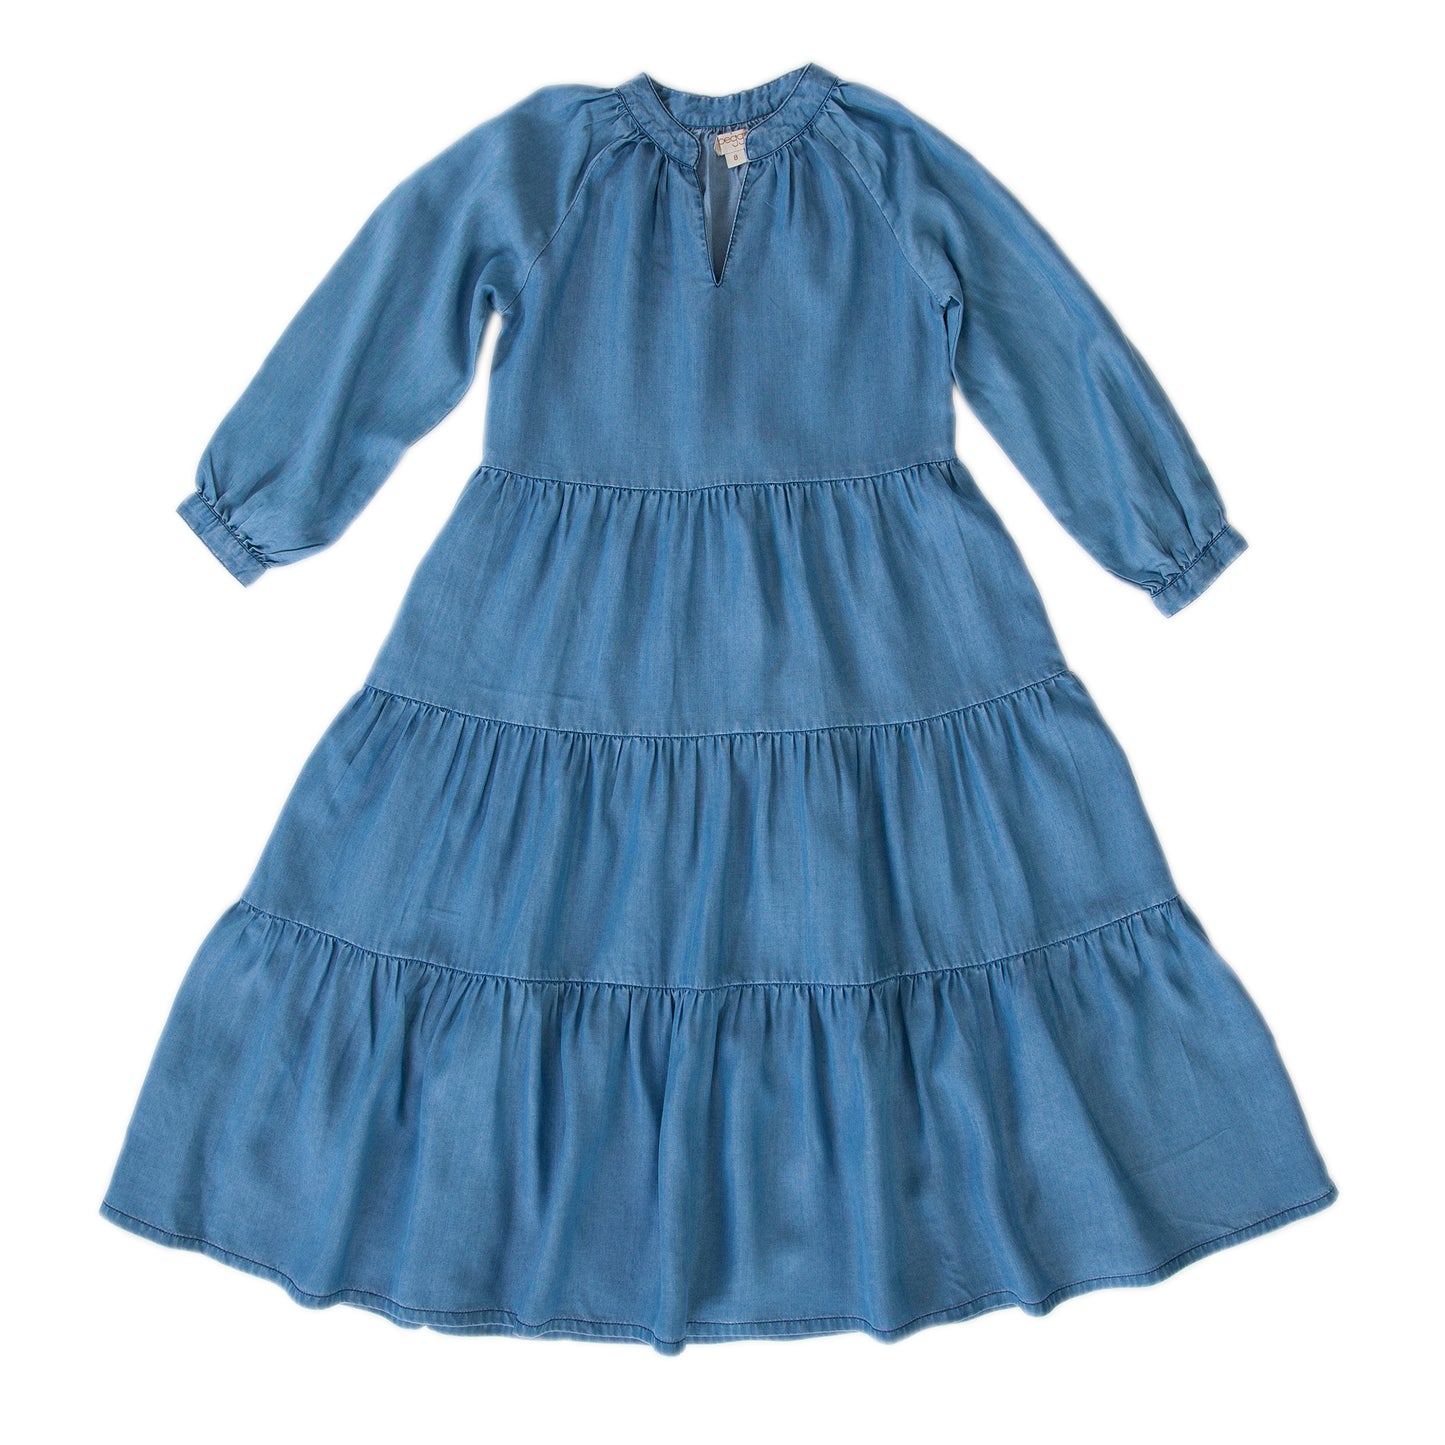 Andie dress in Chambray